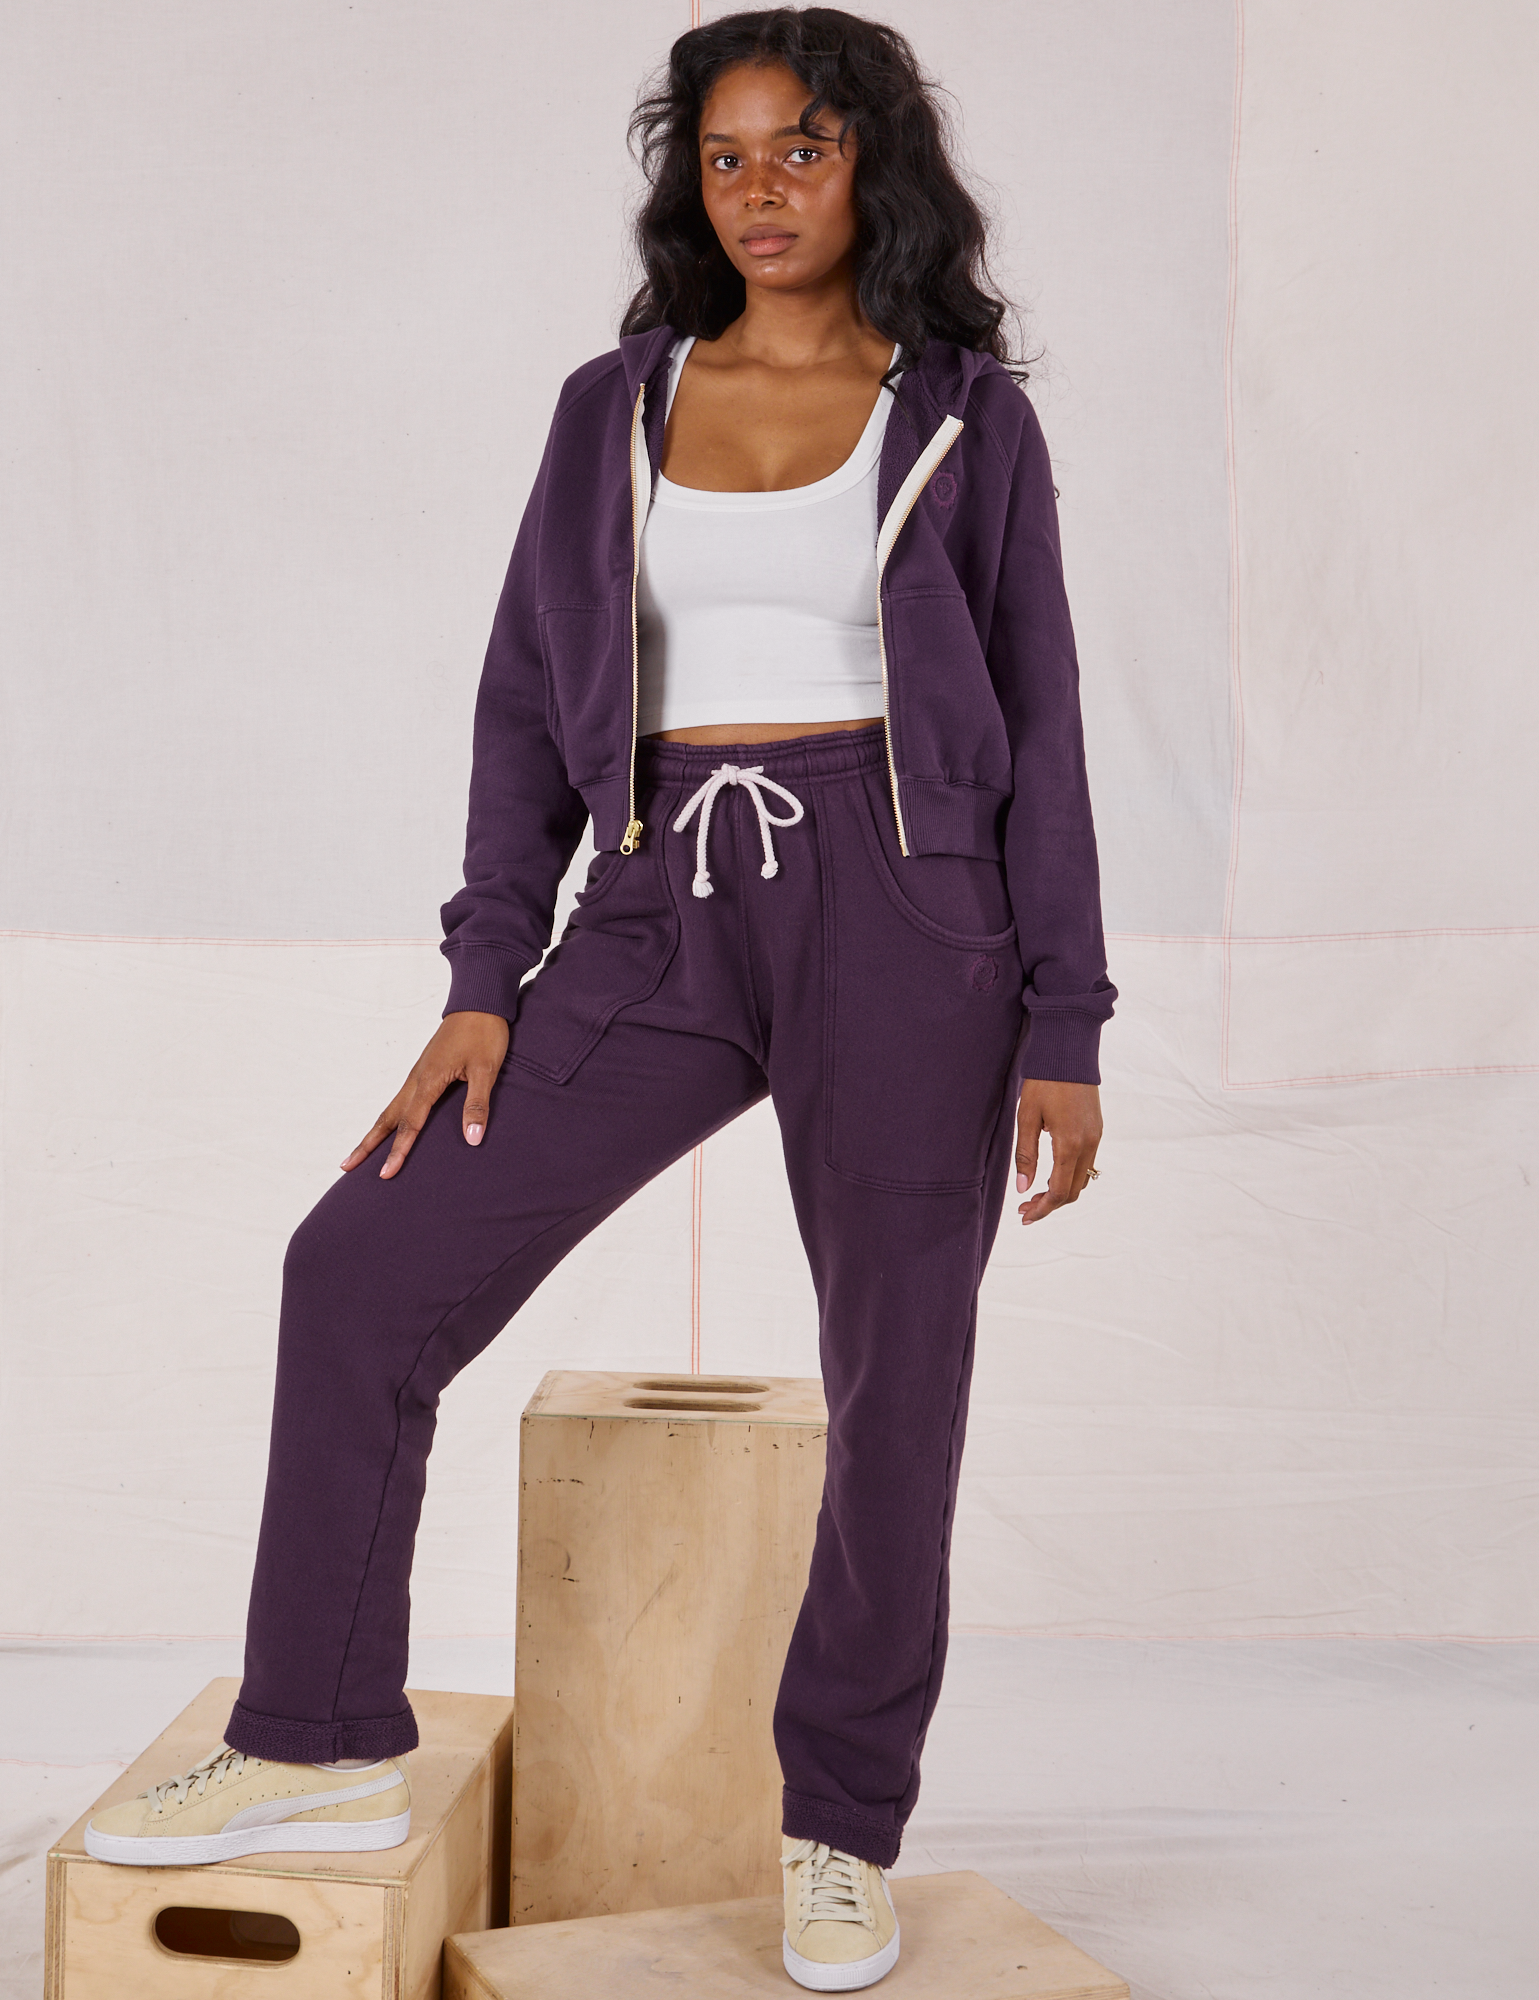 Kandia is 5&#39;3&quot; and wearing P Rolled Cuff Sweat Pants in Nebula Purple paired with matching Cropped Zip Hoodie and a vintage off-white Cropped Tank underneath